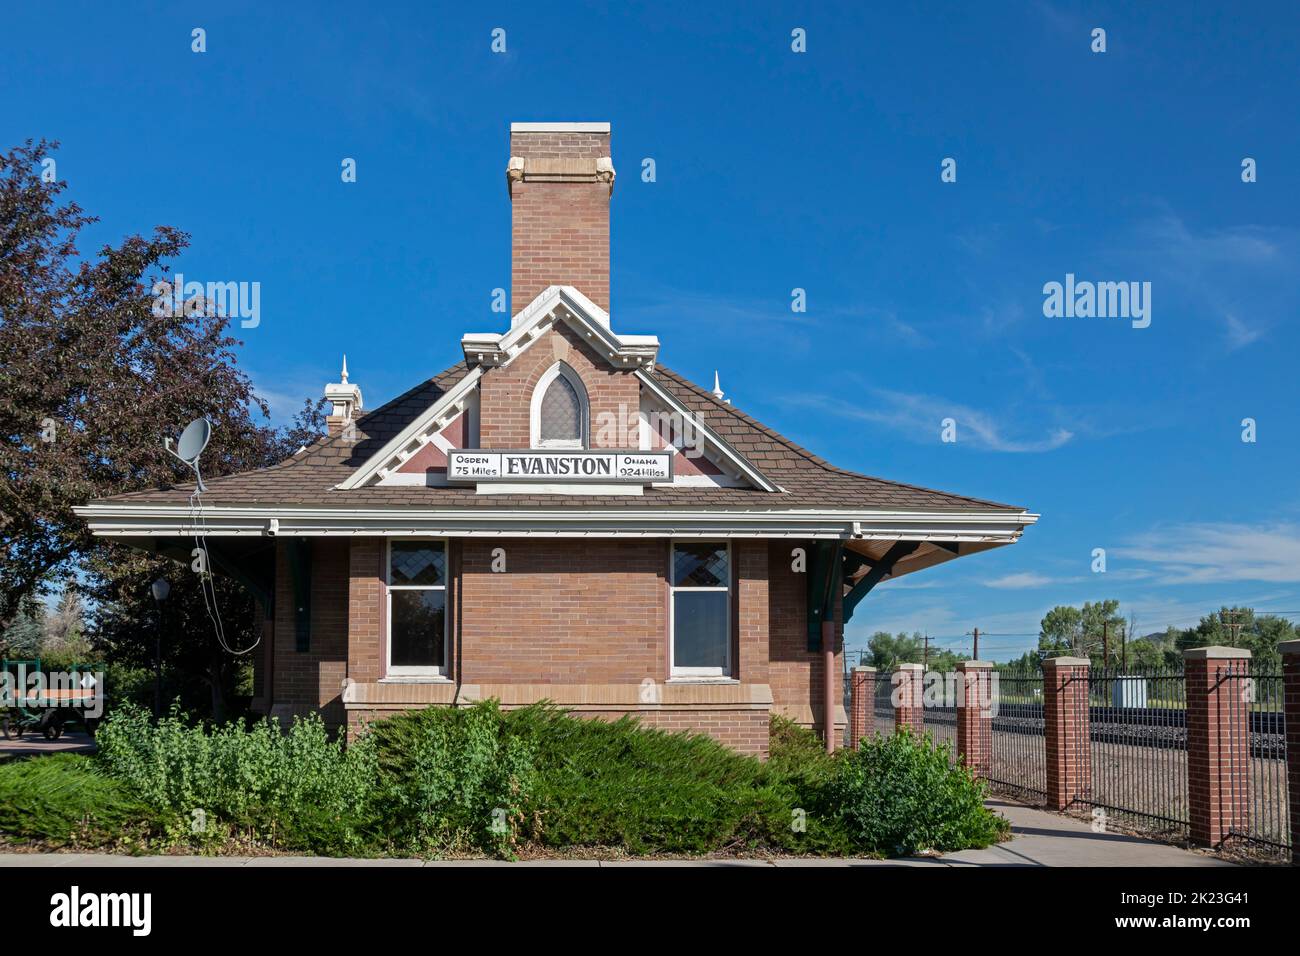 Evanston, Wyoming - The Union Pacific passenger depot, built in 1900 with separate waiting rooms for men and women. Evanston no longer has passenger r Stock Photo